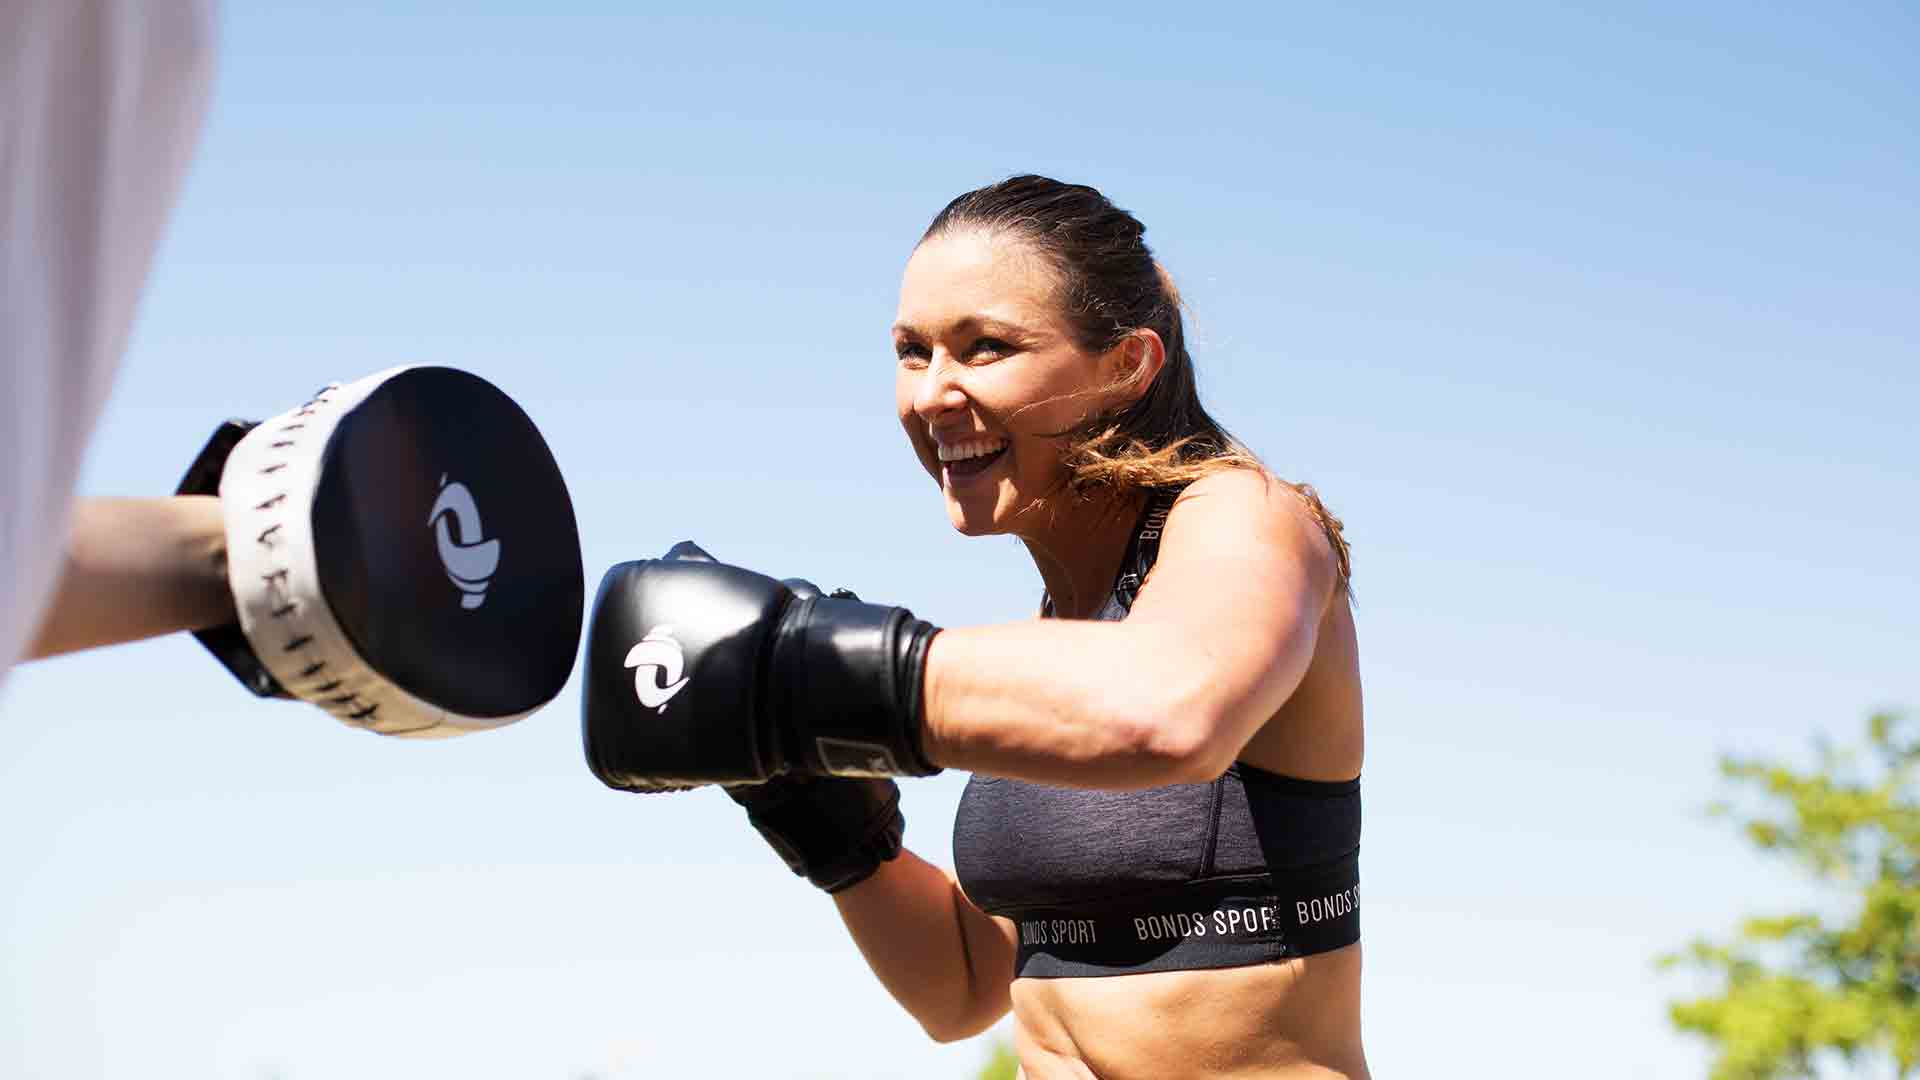 personal trainer using boxing equipment